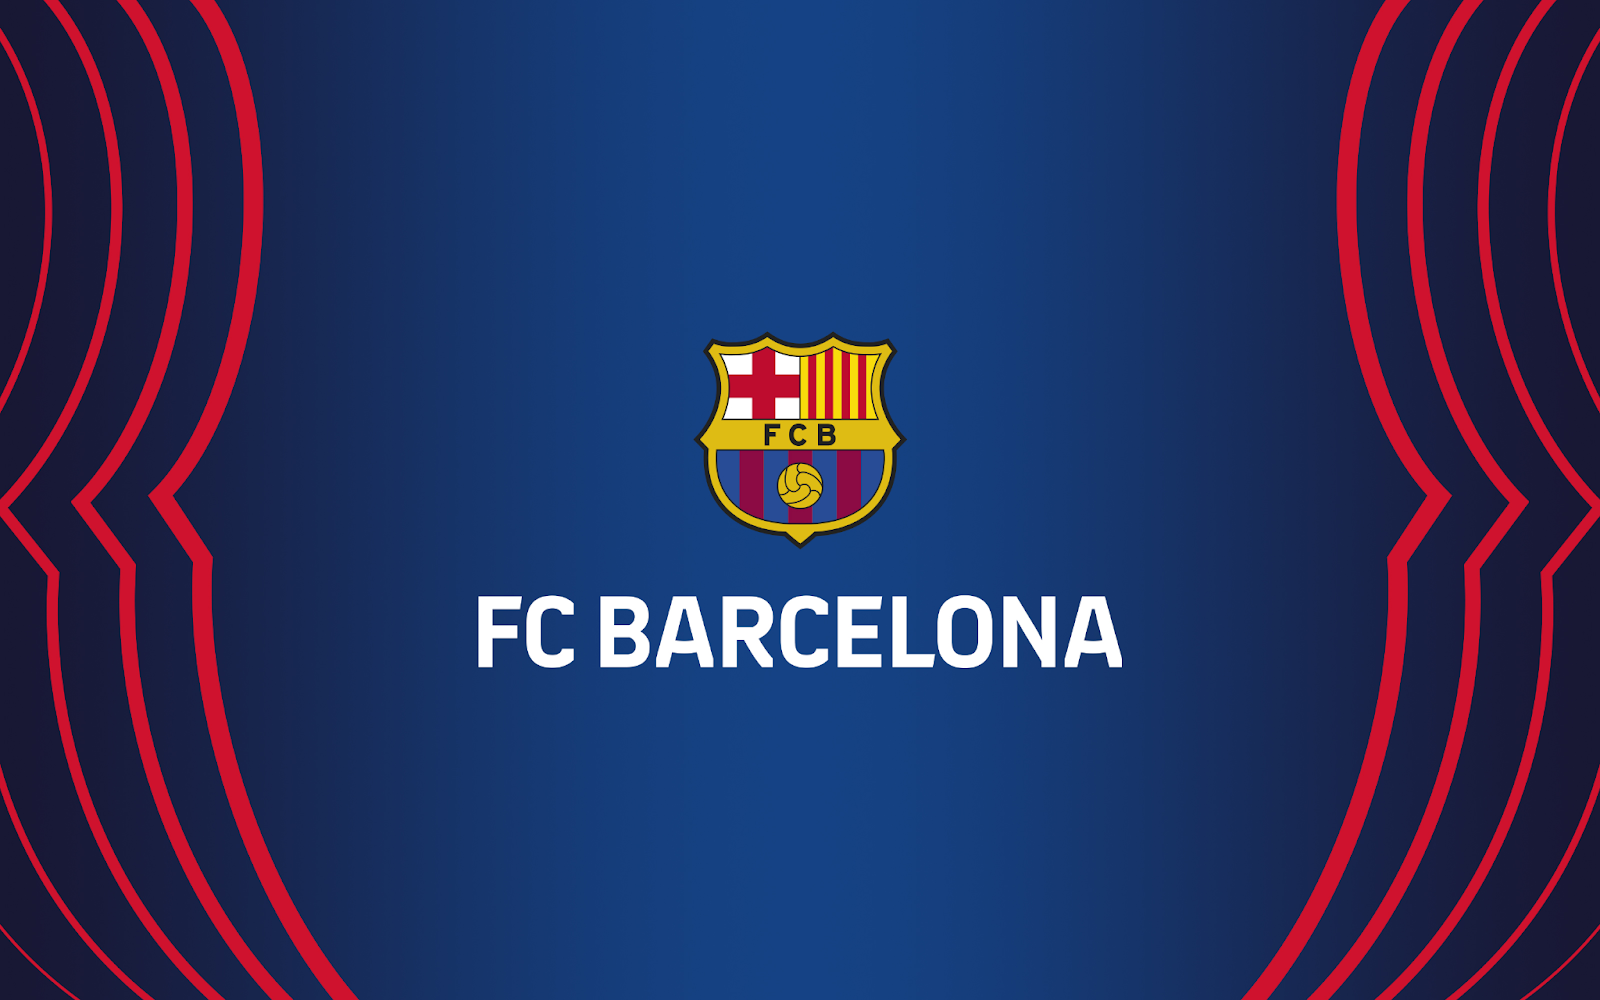 Latest Barcelona summer transfer news. It is that time of year when football clubs from all over the world aim to strengthen their squads while supporters